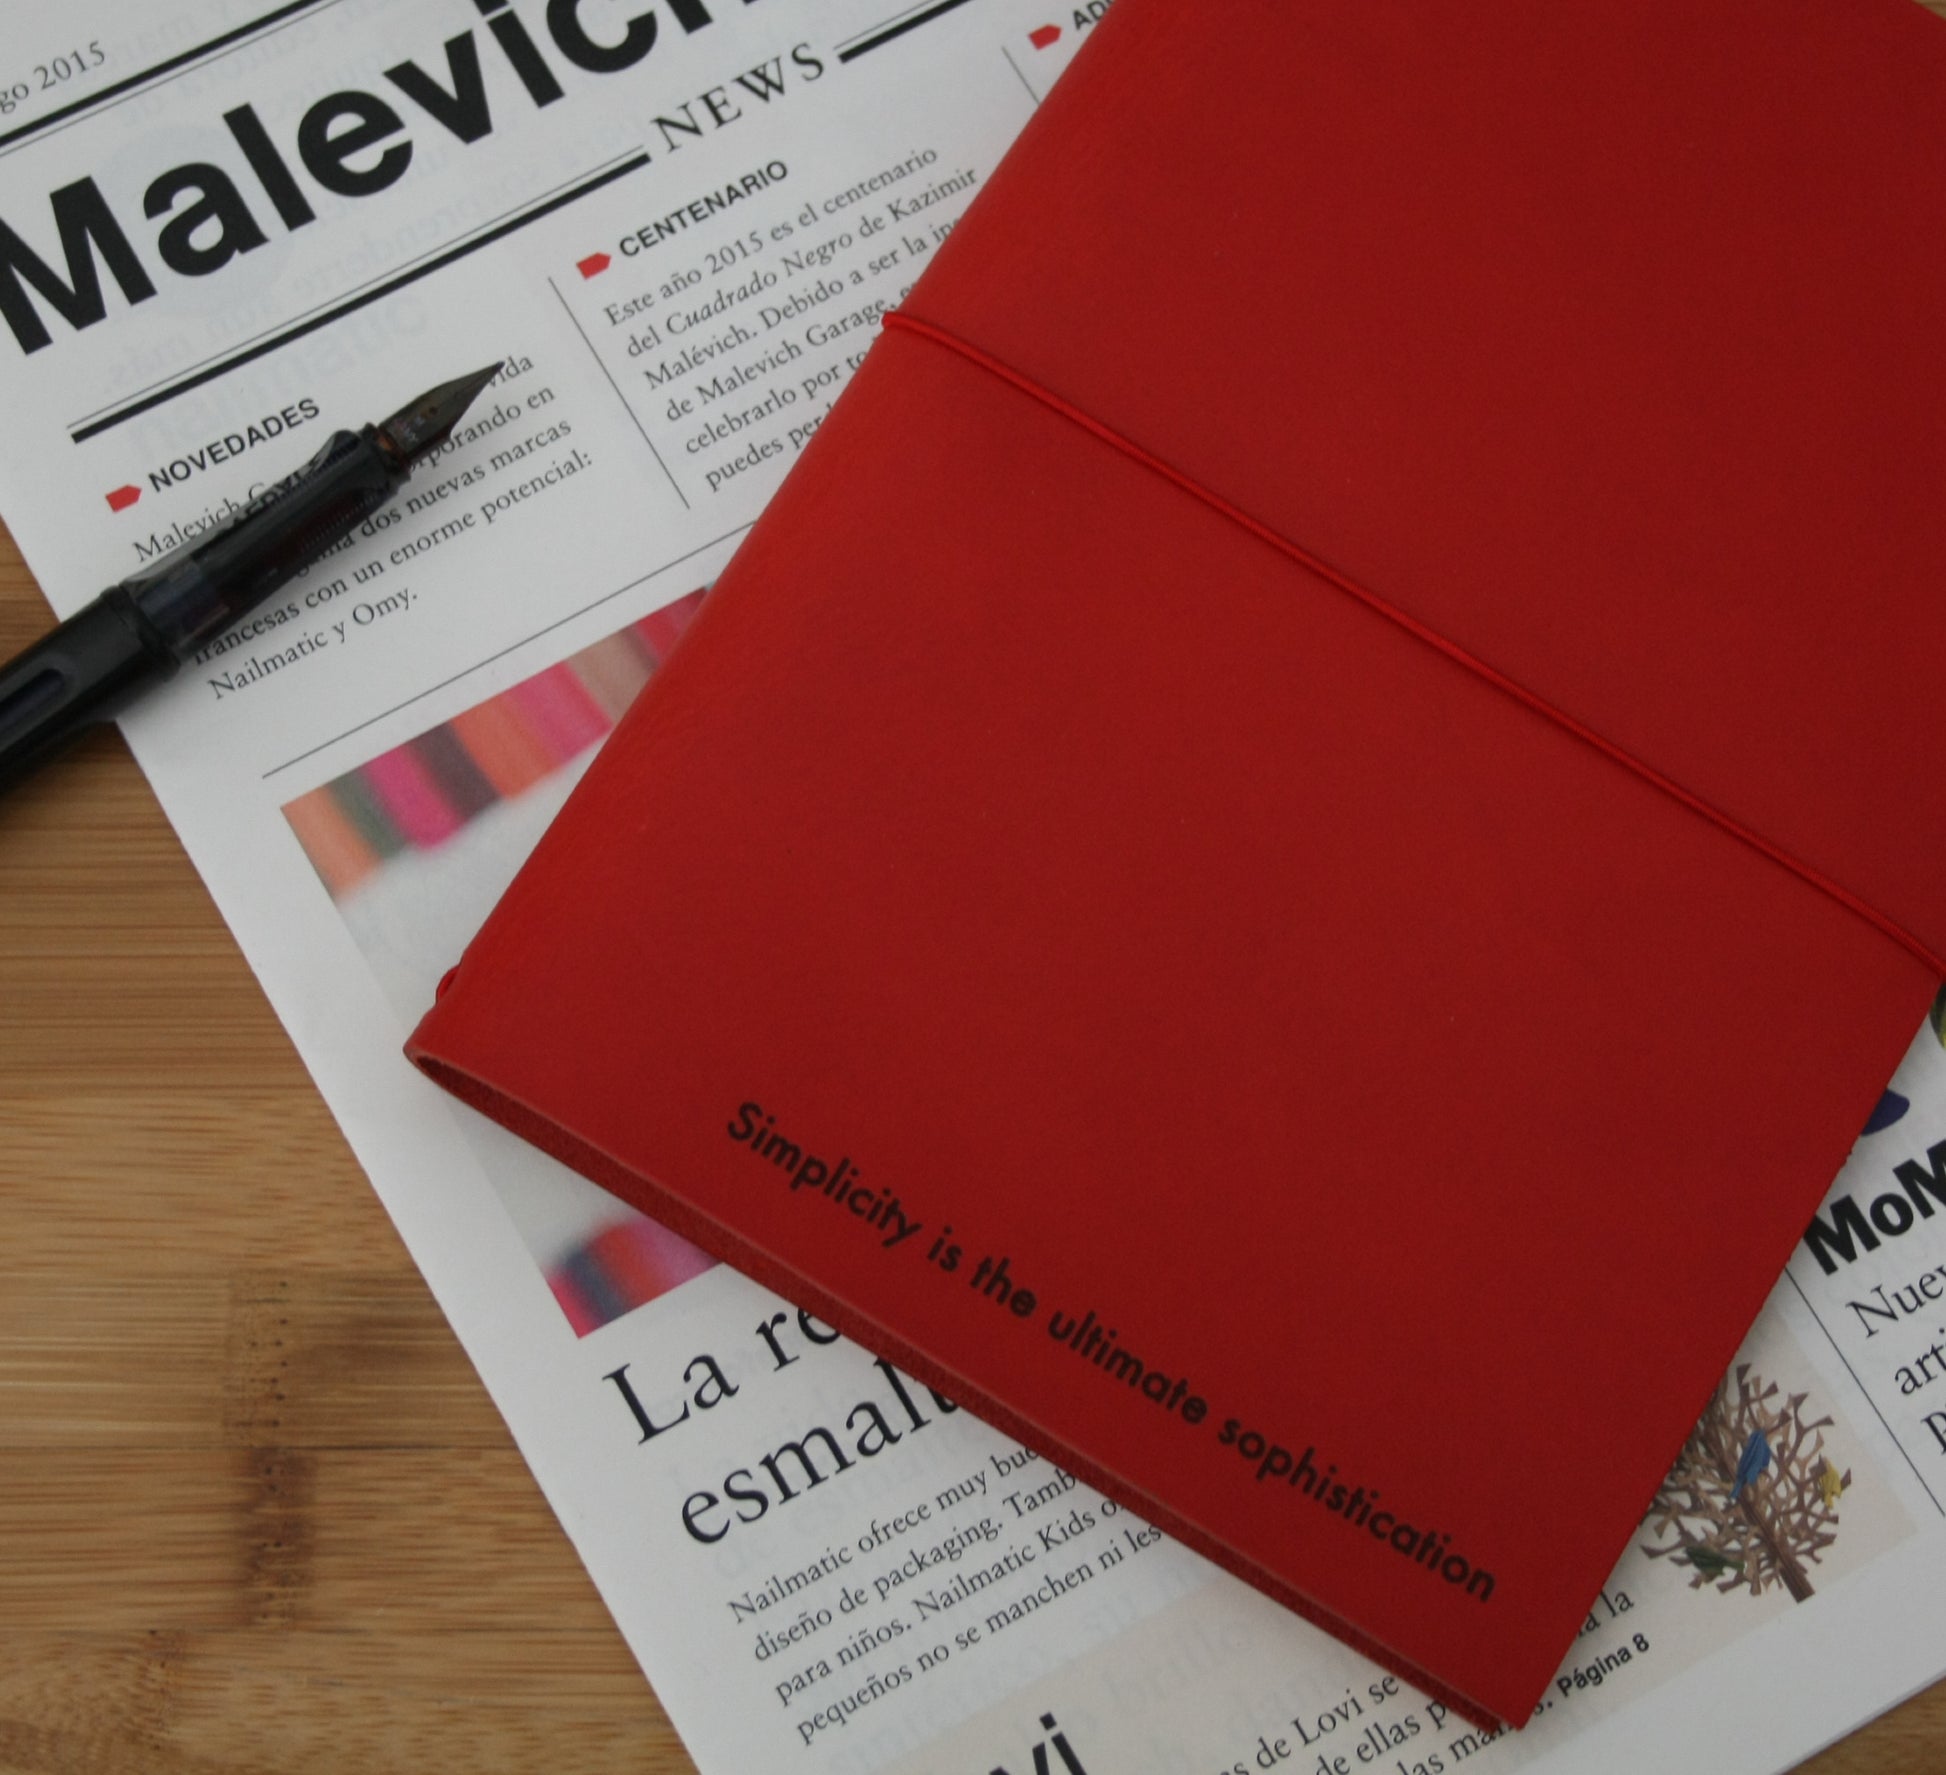 Simplicity is... A5 Leather Journal kit - Red  beamalevich architecture gift design gift art gift